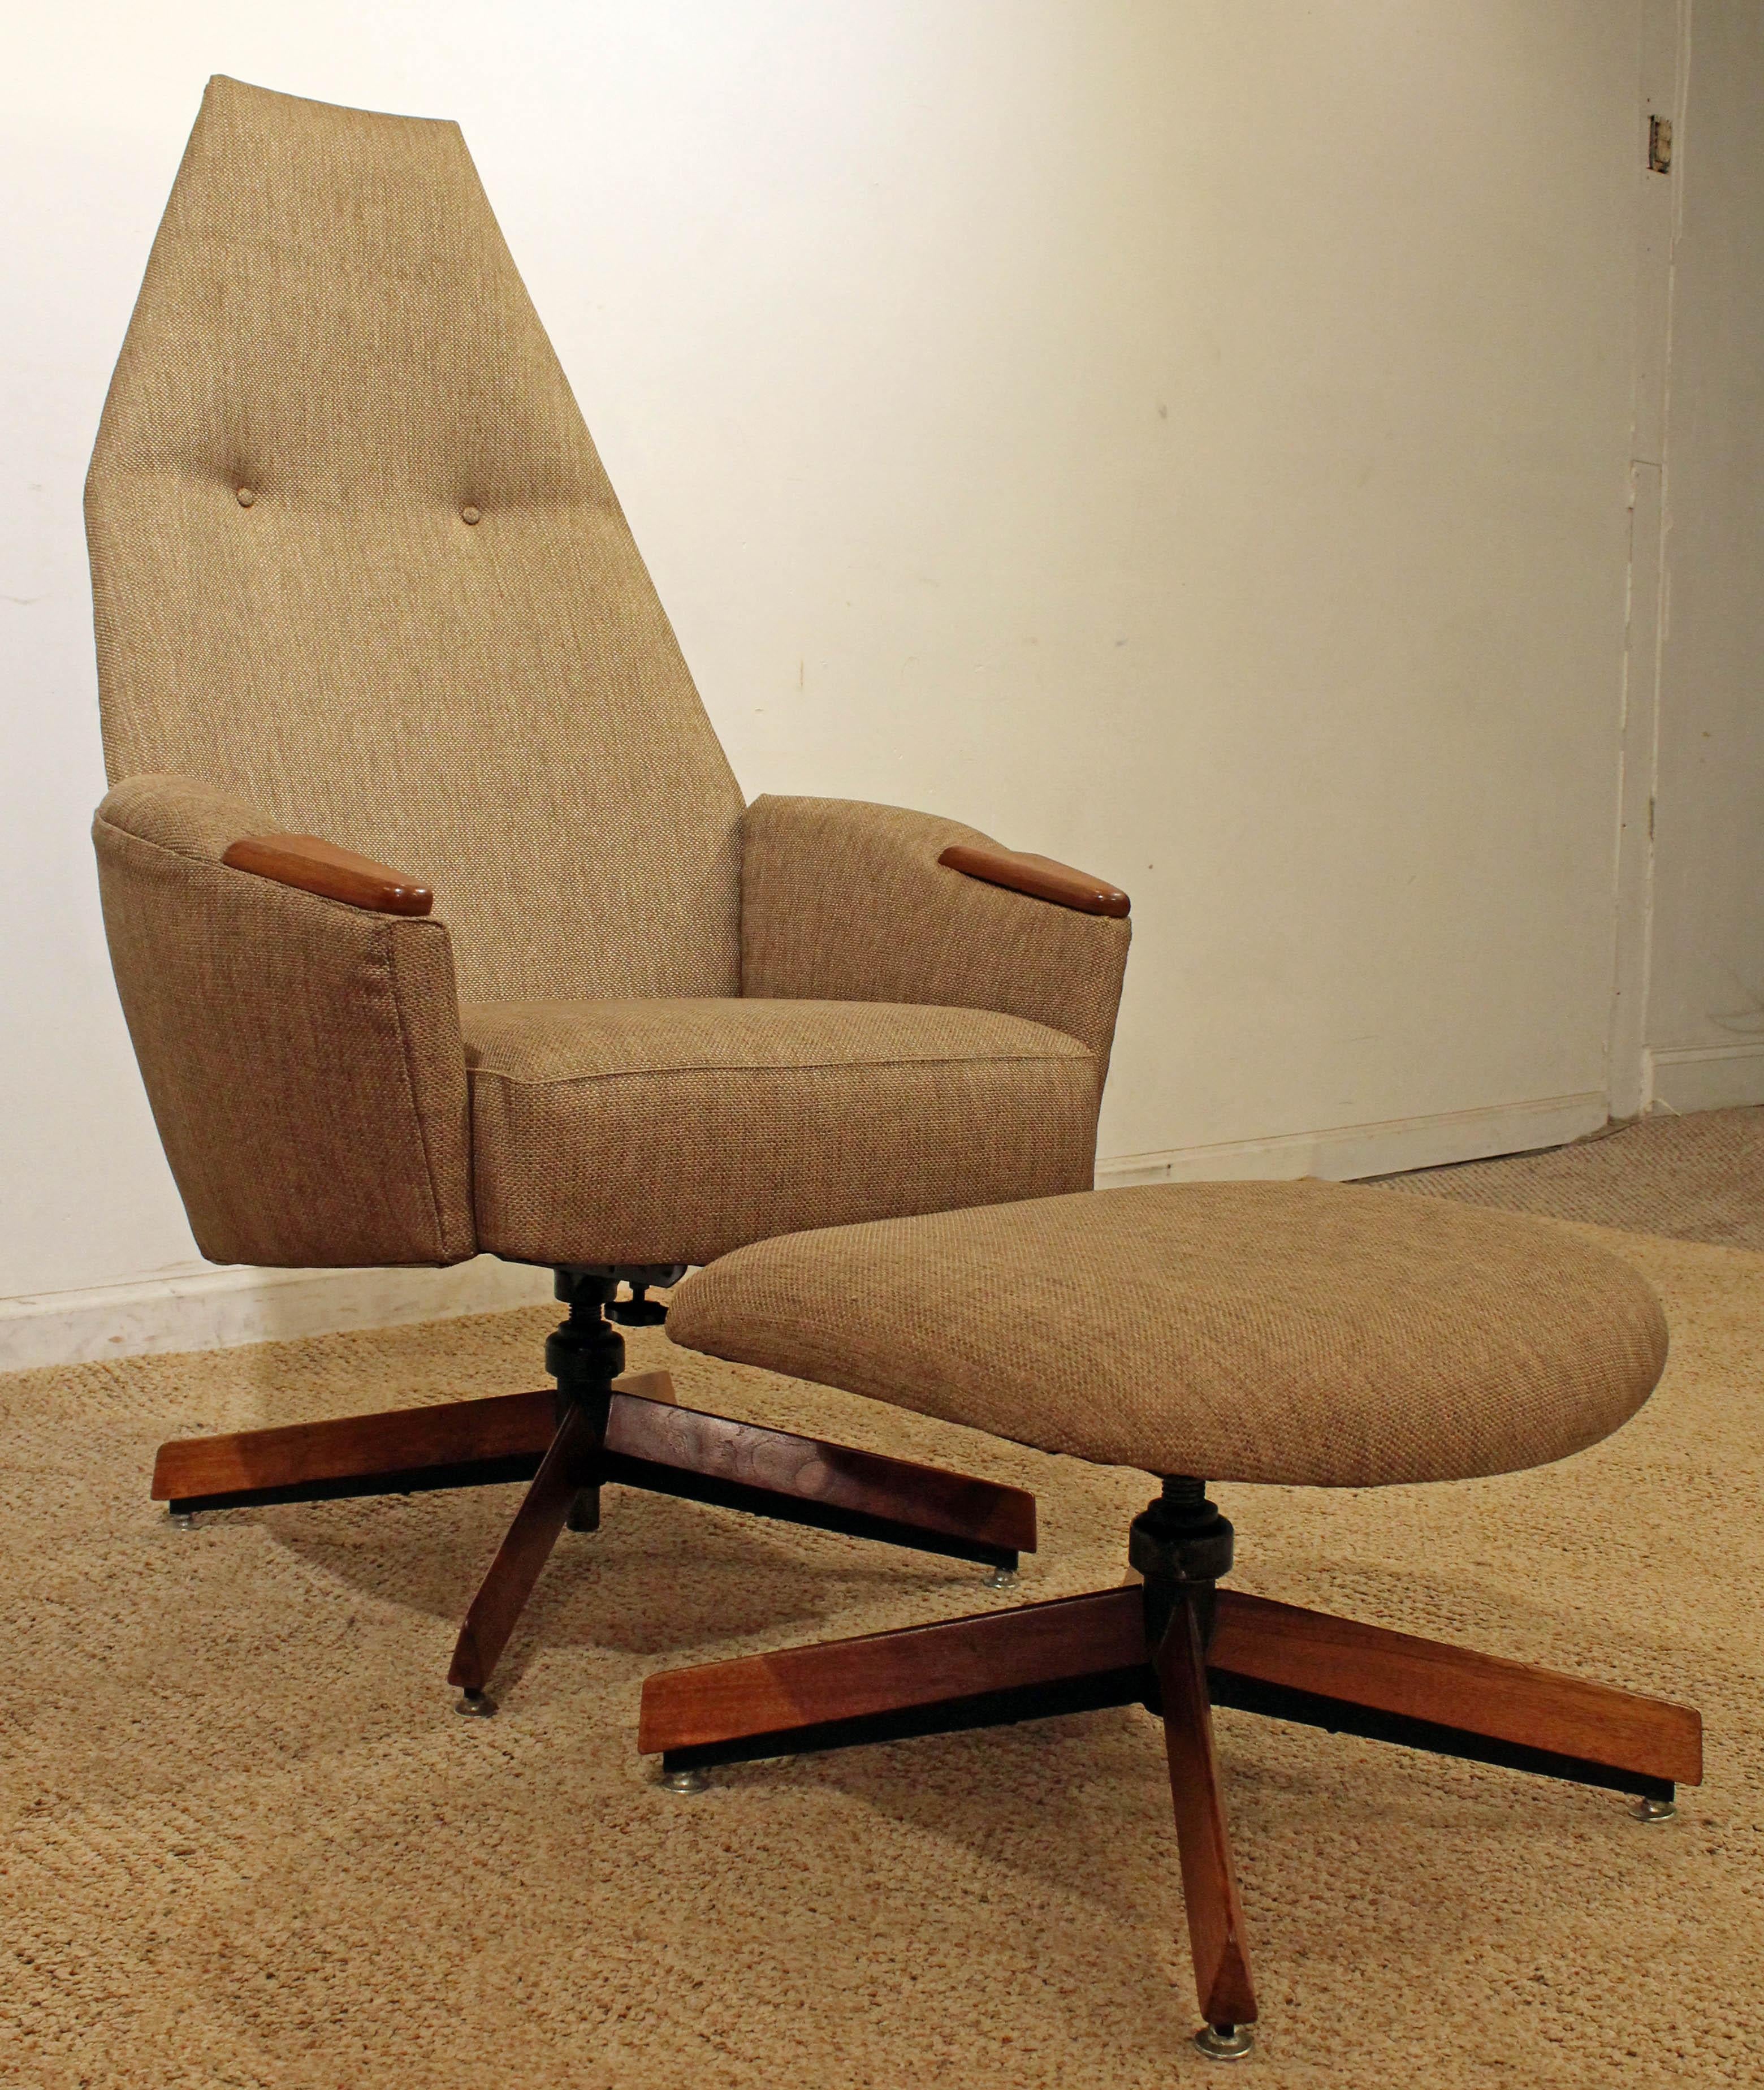 What a find. Offered is a beautiful Mid-Century Modern lounge chair and ottoman, designed by Adrian Pearsall for Craft Associates (2174C). This set has been fastidiously restored (refinished, reupholstered, new cushions) and is like new. Both pieces